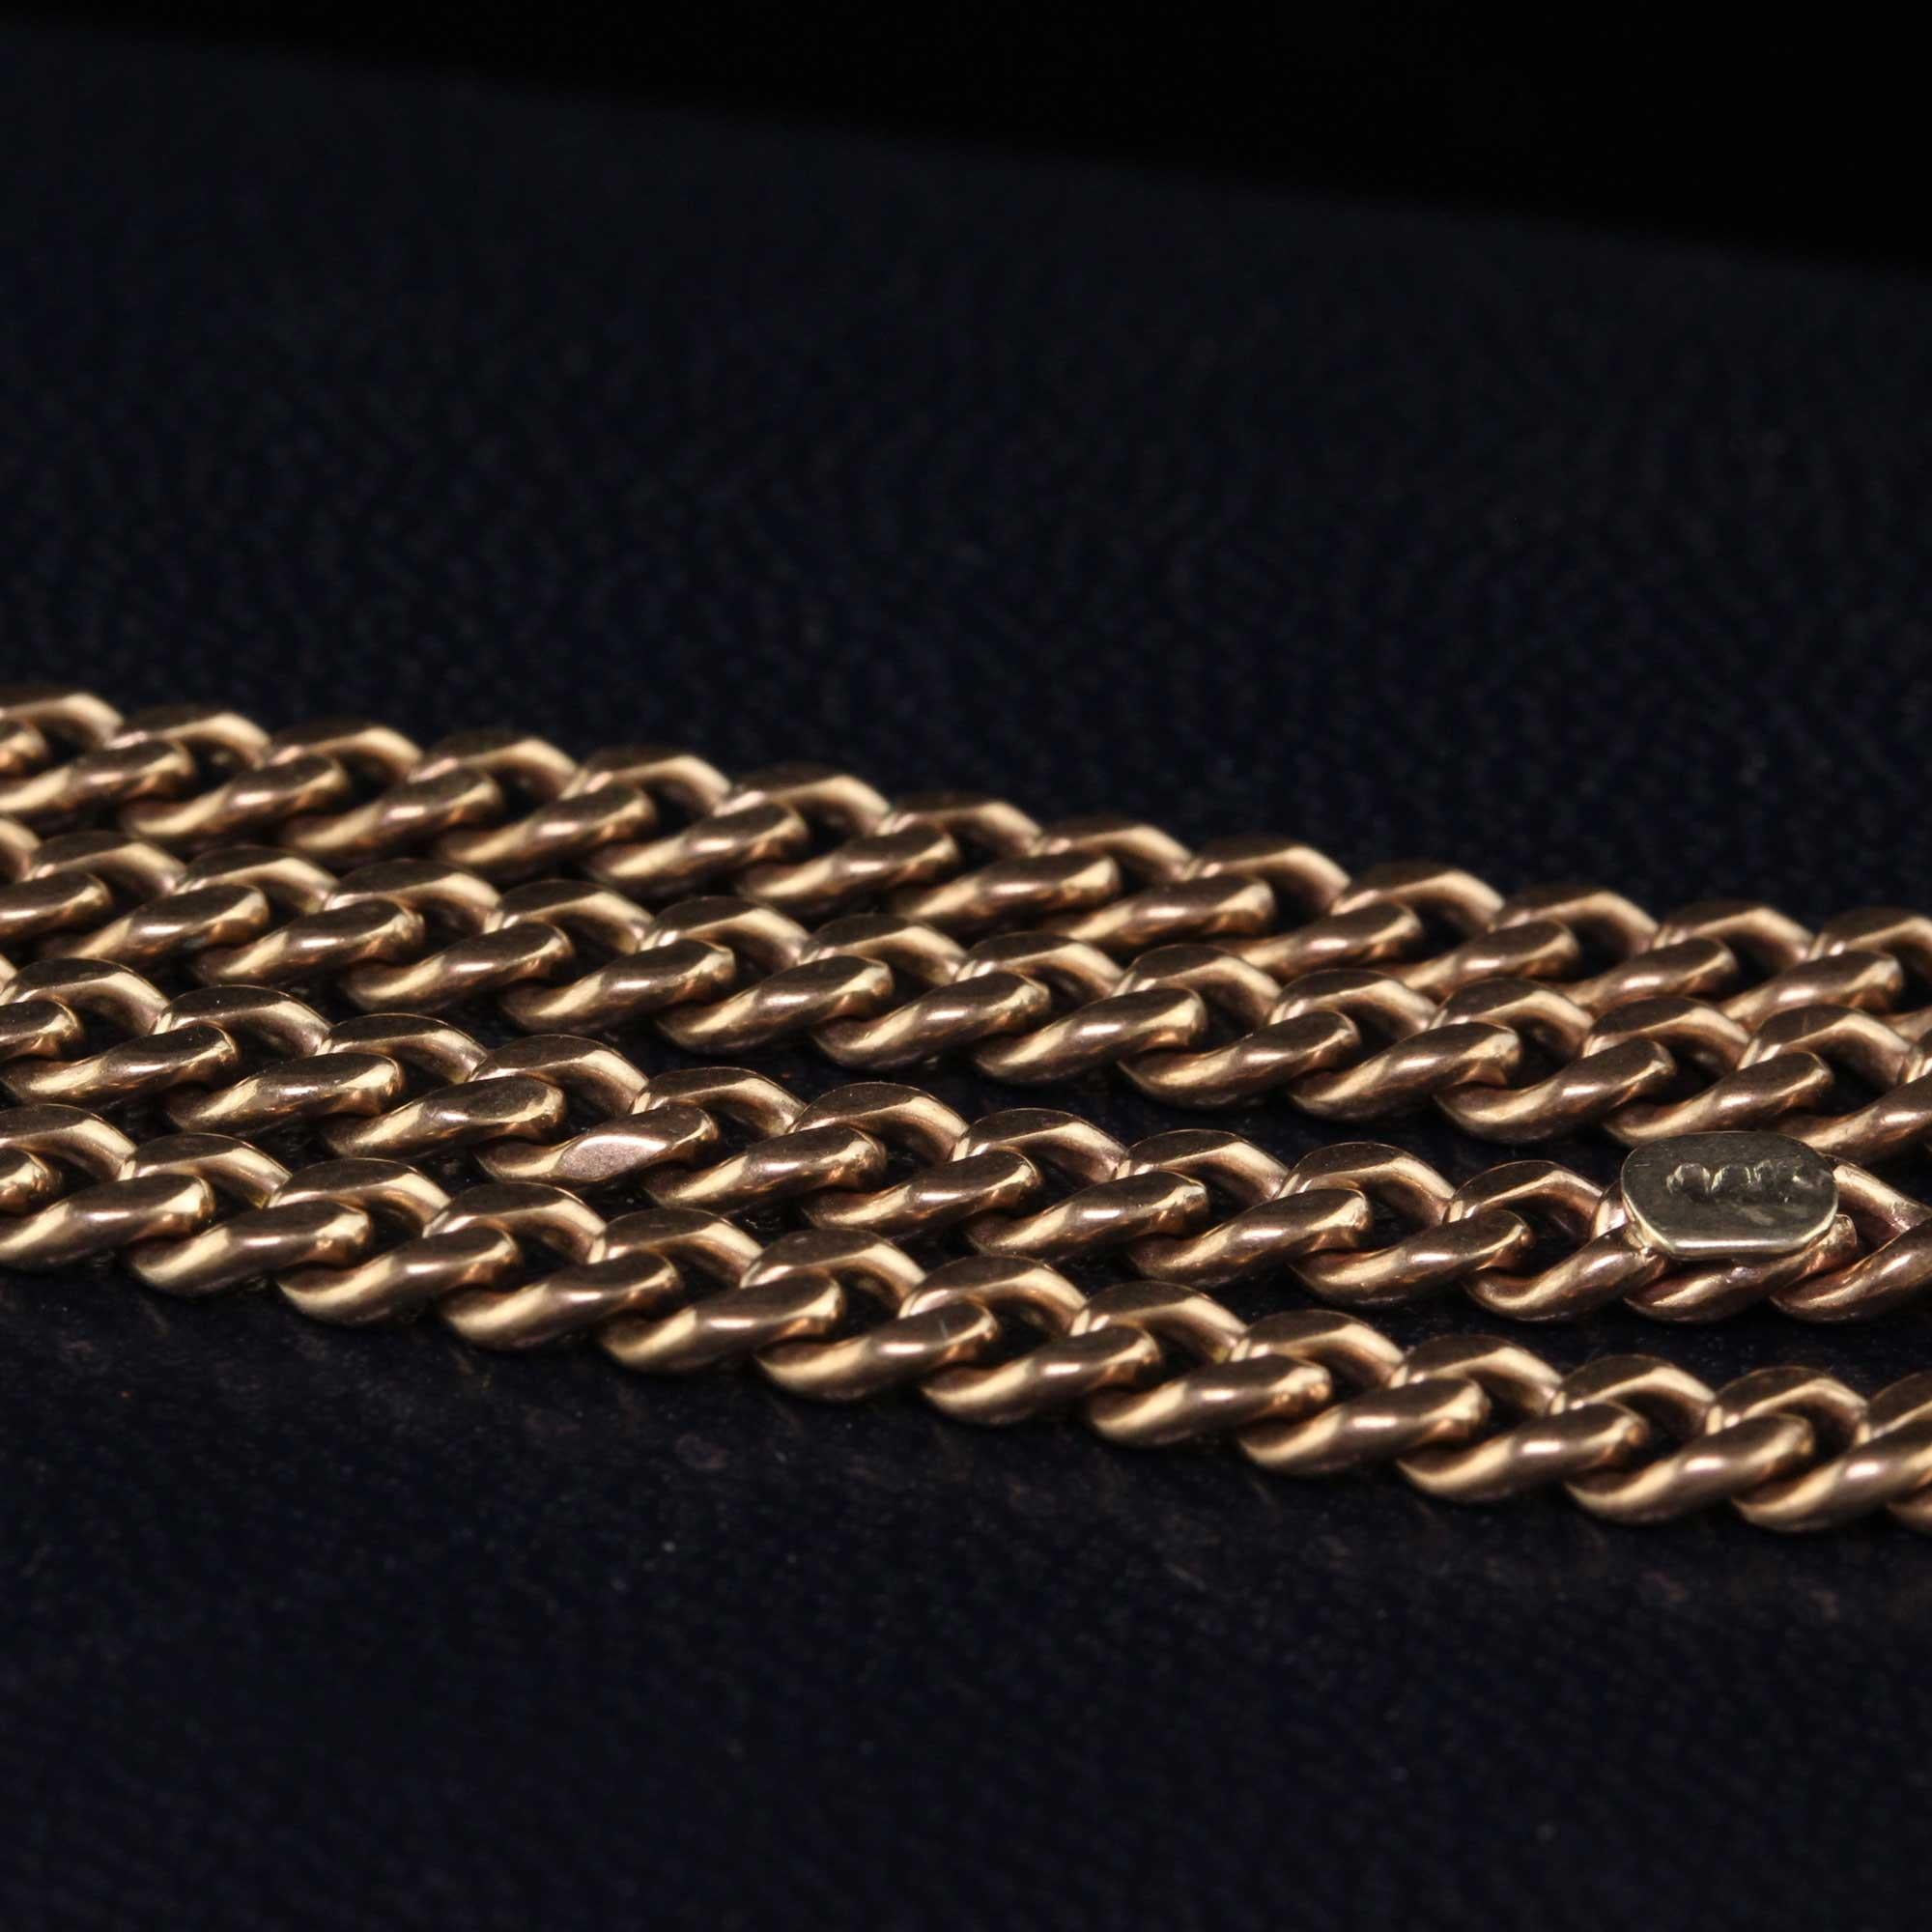 Antique Art Deco 14K Rose Gold Curb Link T Link Chain - 17 inches 2